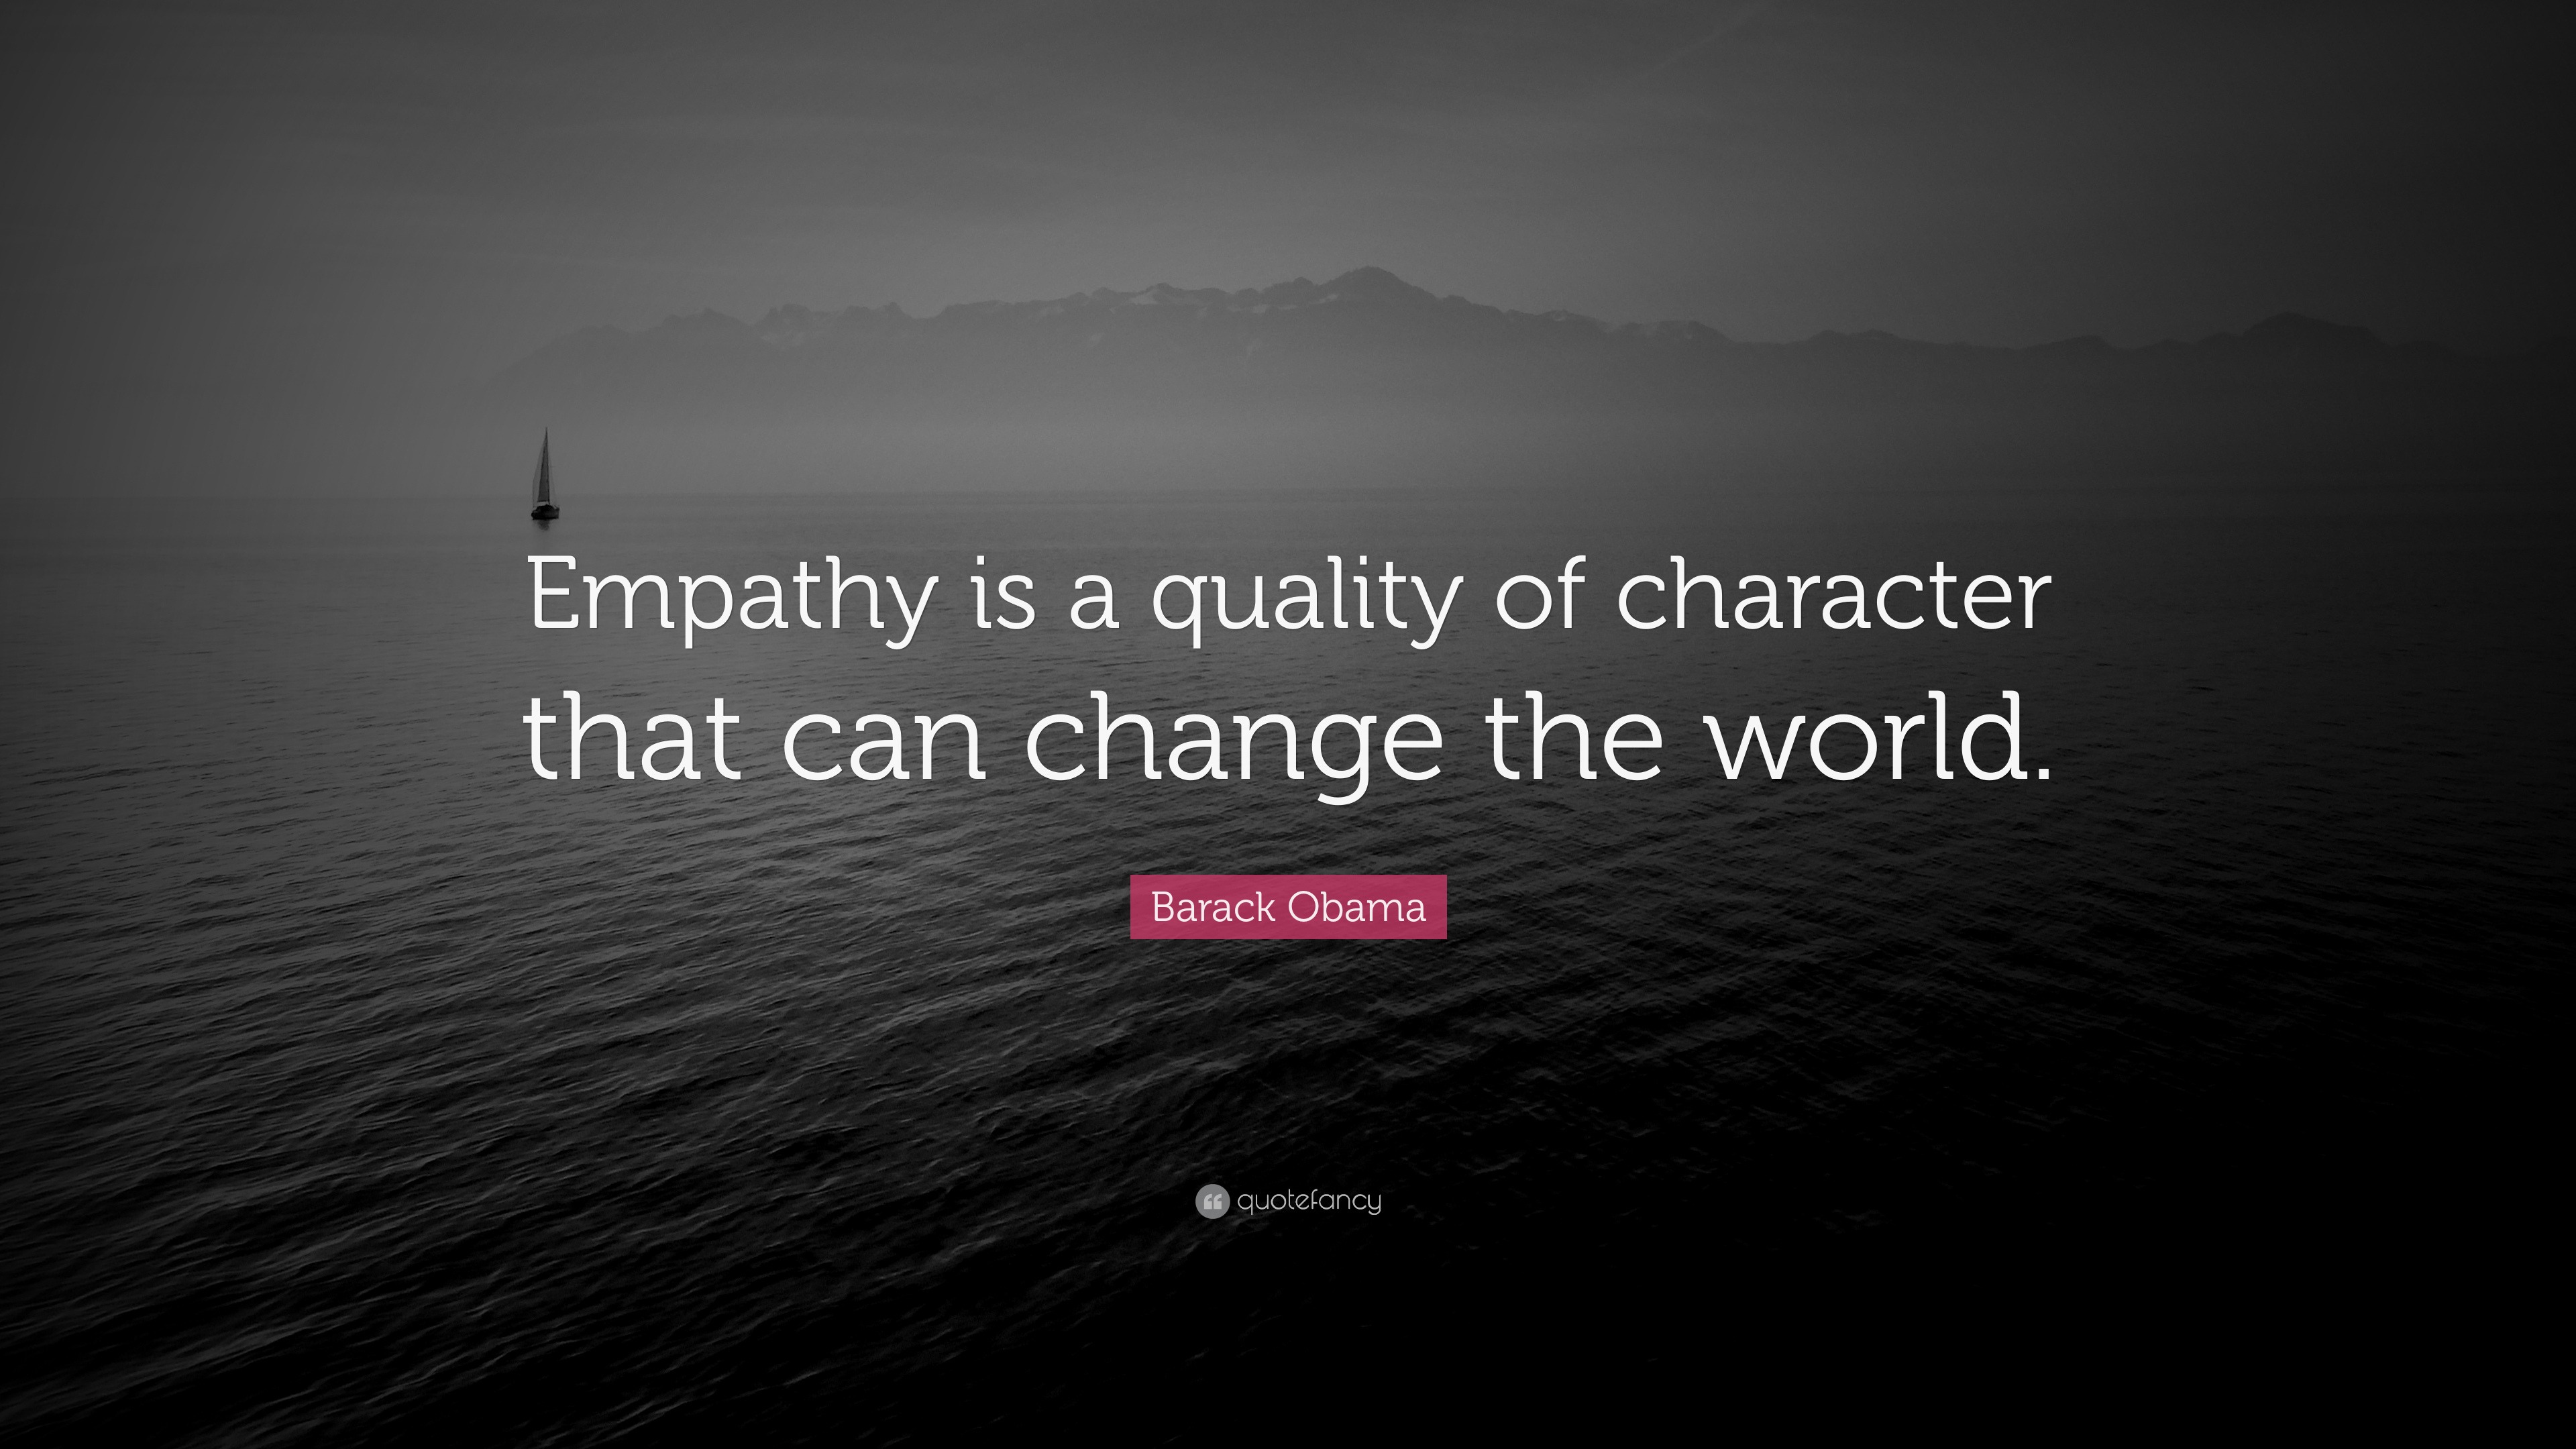 Barack Obama Quote: “Empathy is a quality of character that can change